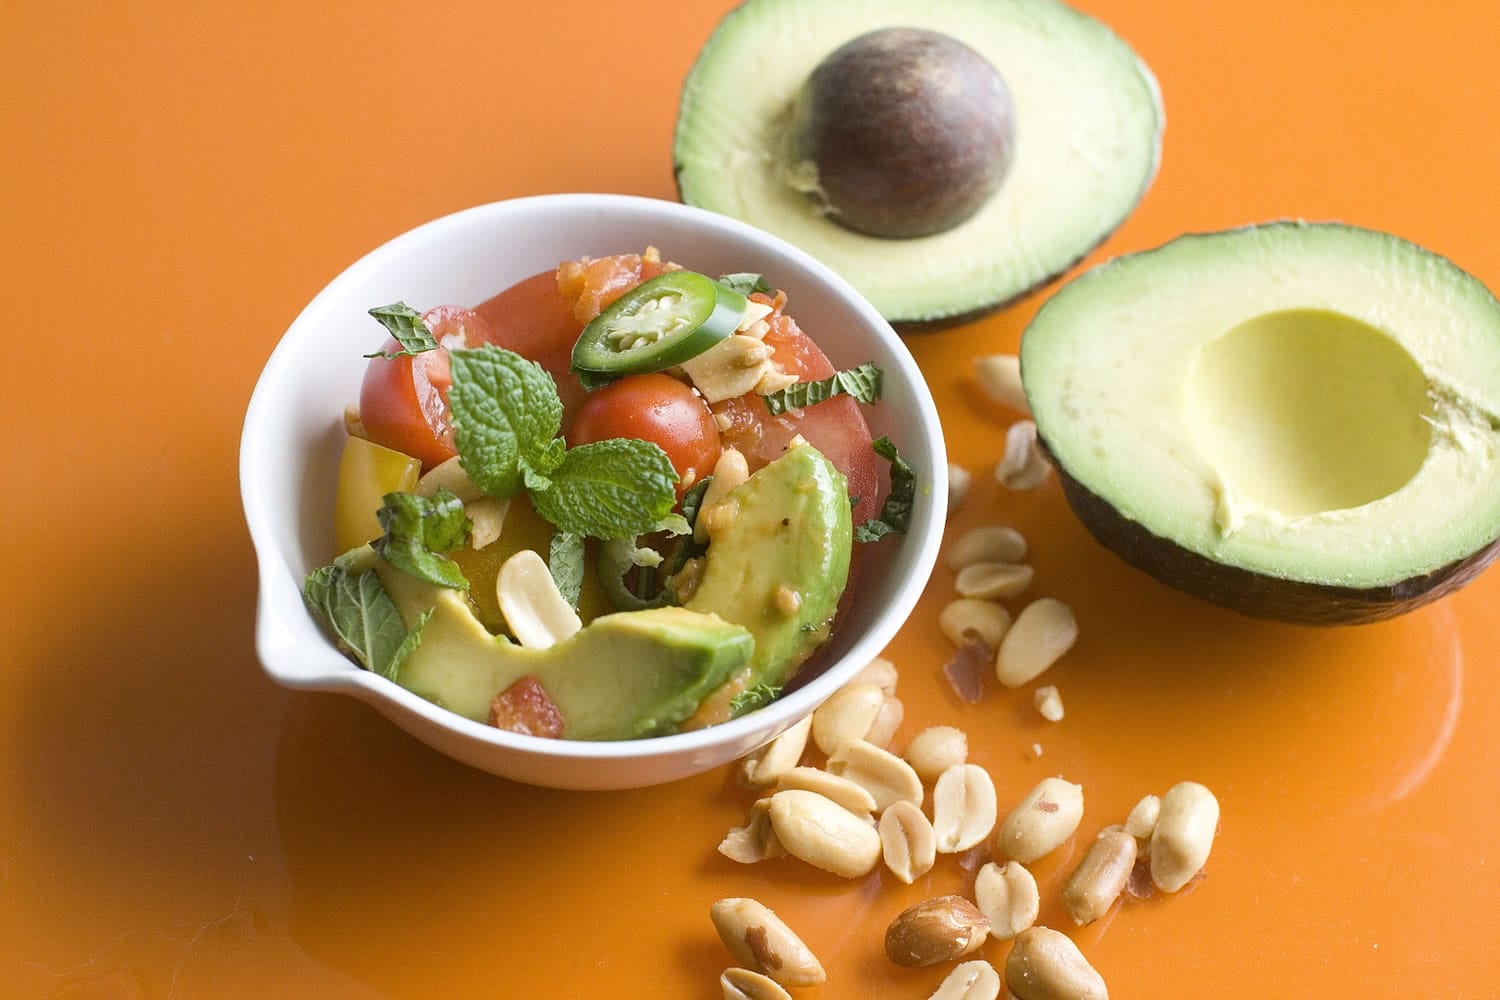 Tomato and Avocado Salad With Gingered Tomato Vinaigrette and Toasted Peanuts